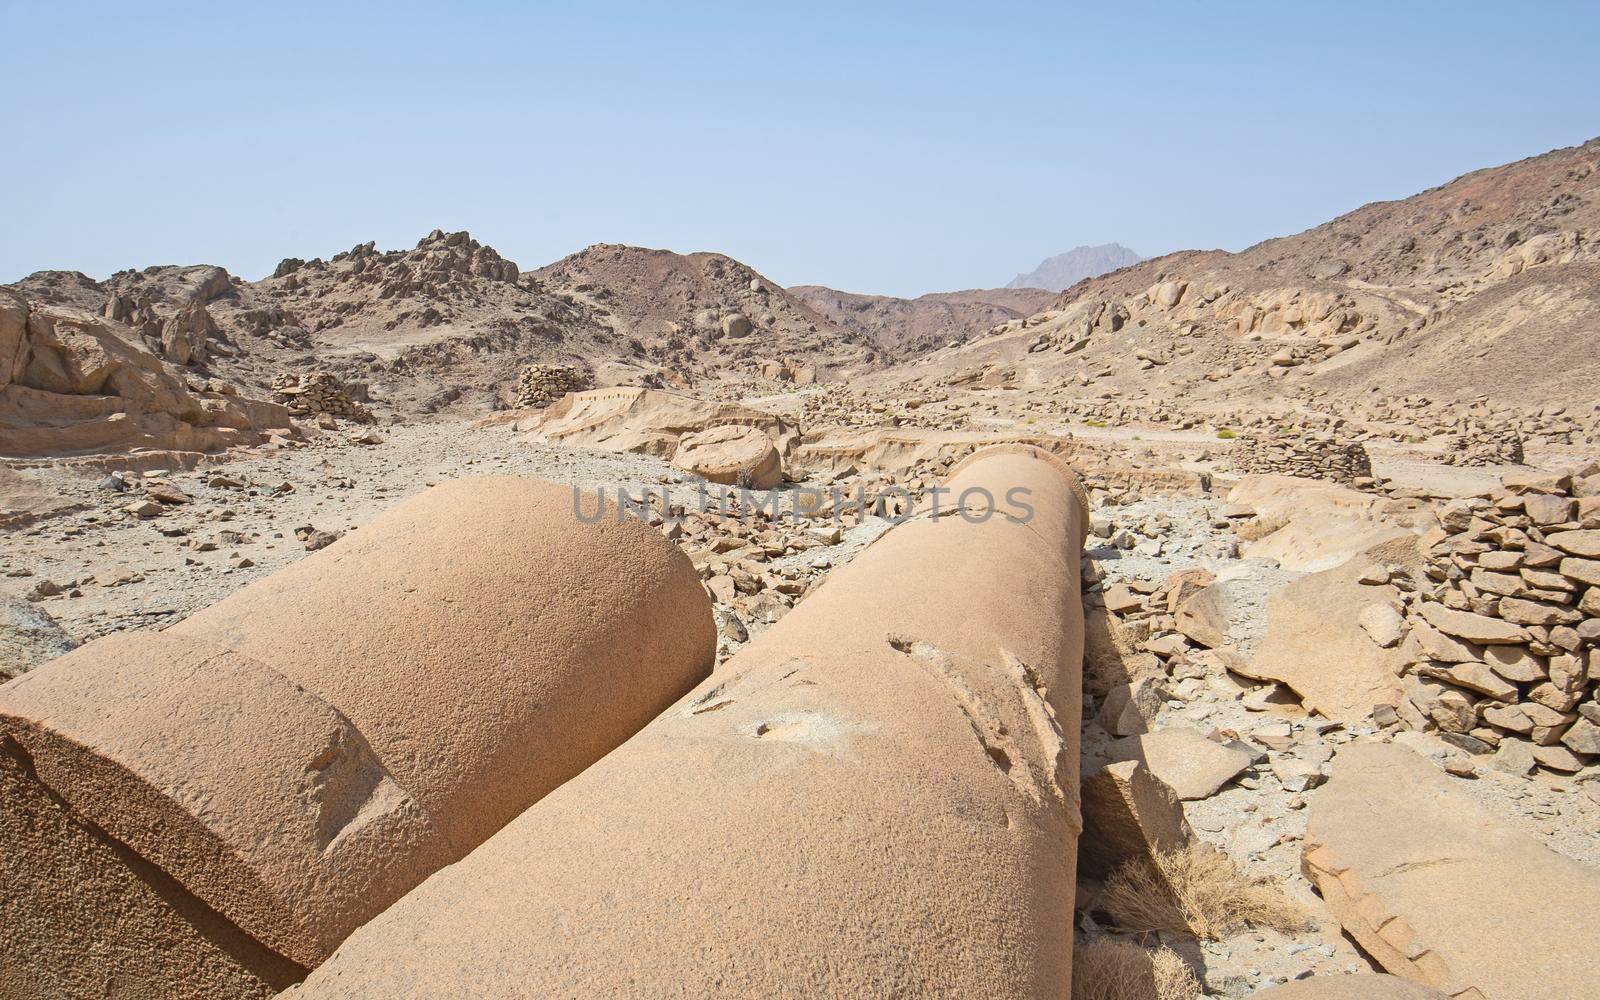 View across old abandoned column pillar at Roman quarry town Mons Claudianus in Egyptian eastern desert